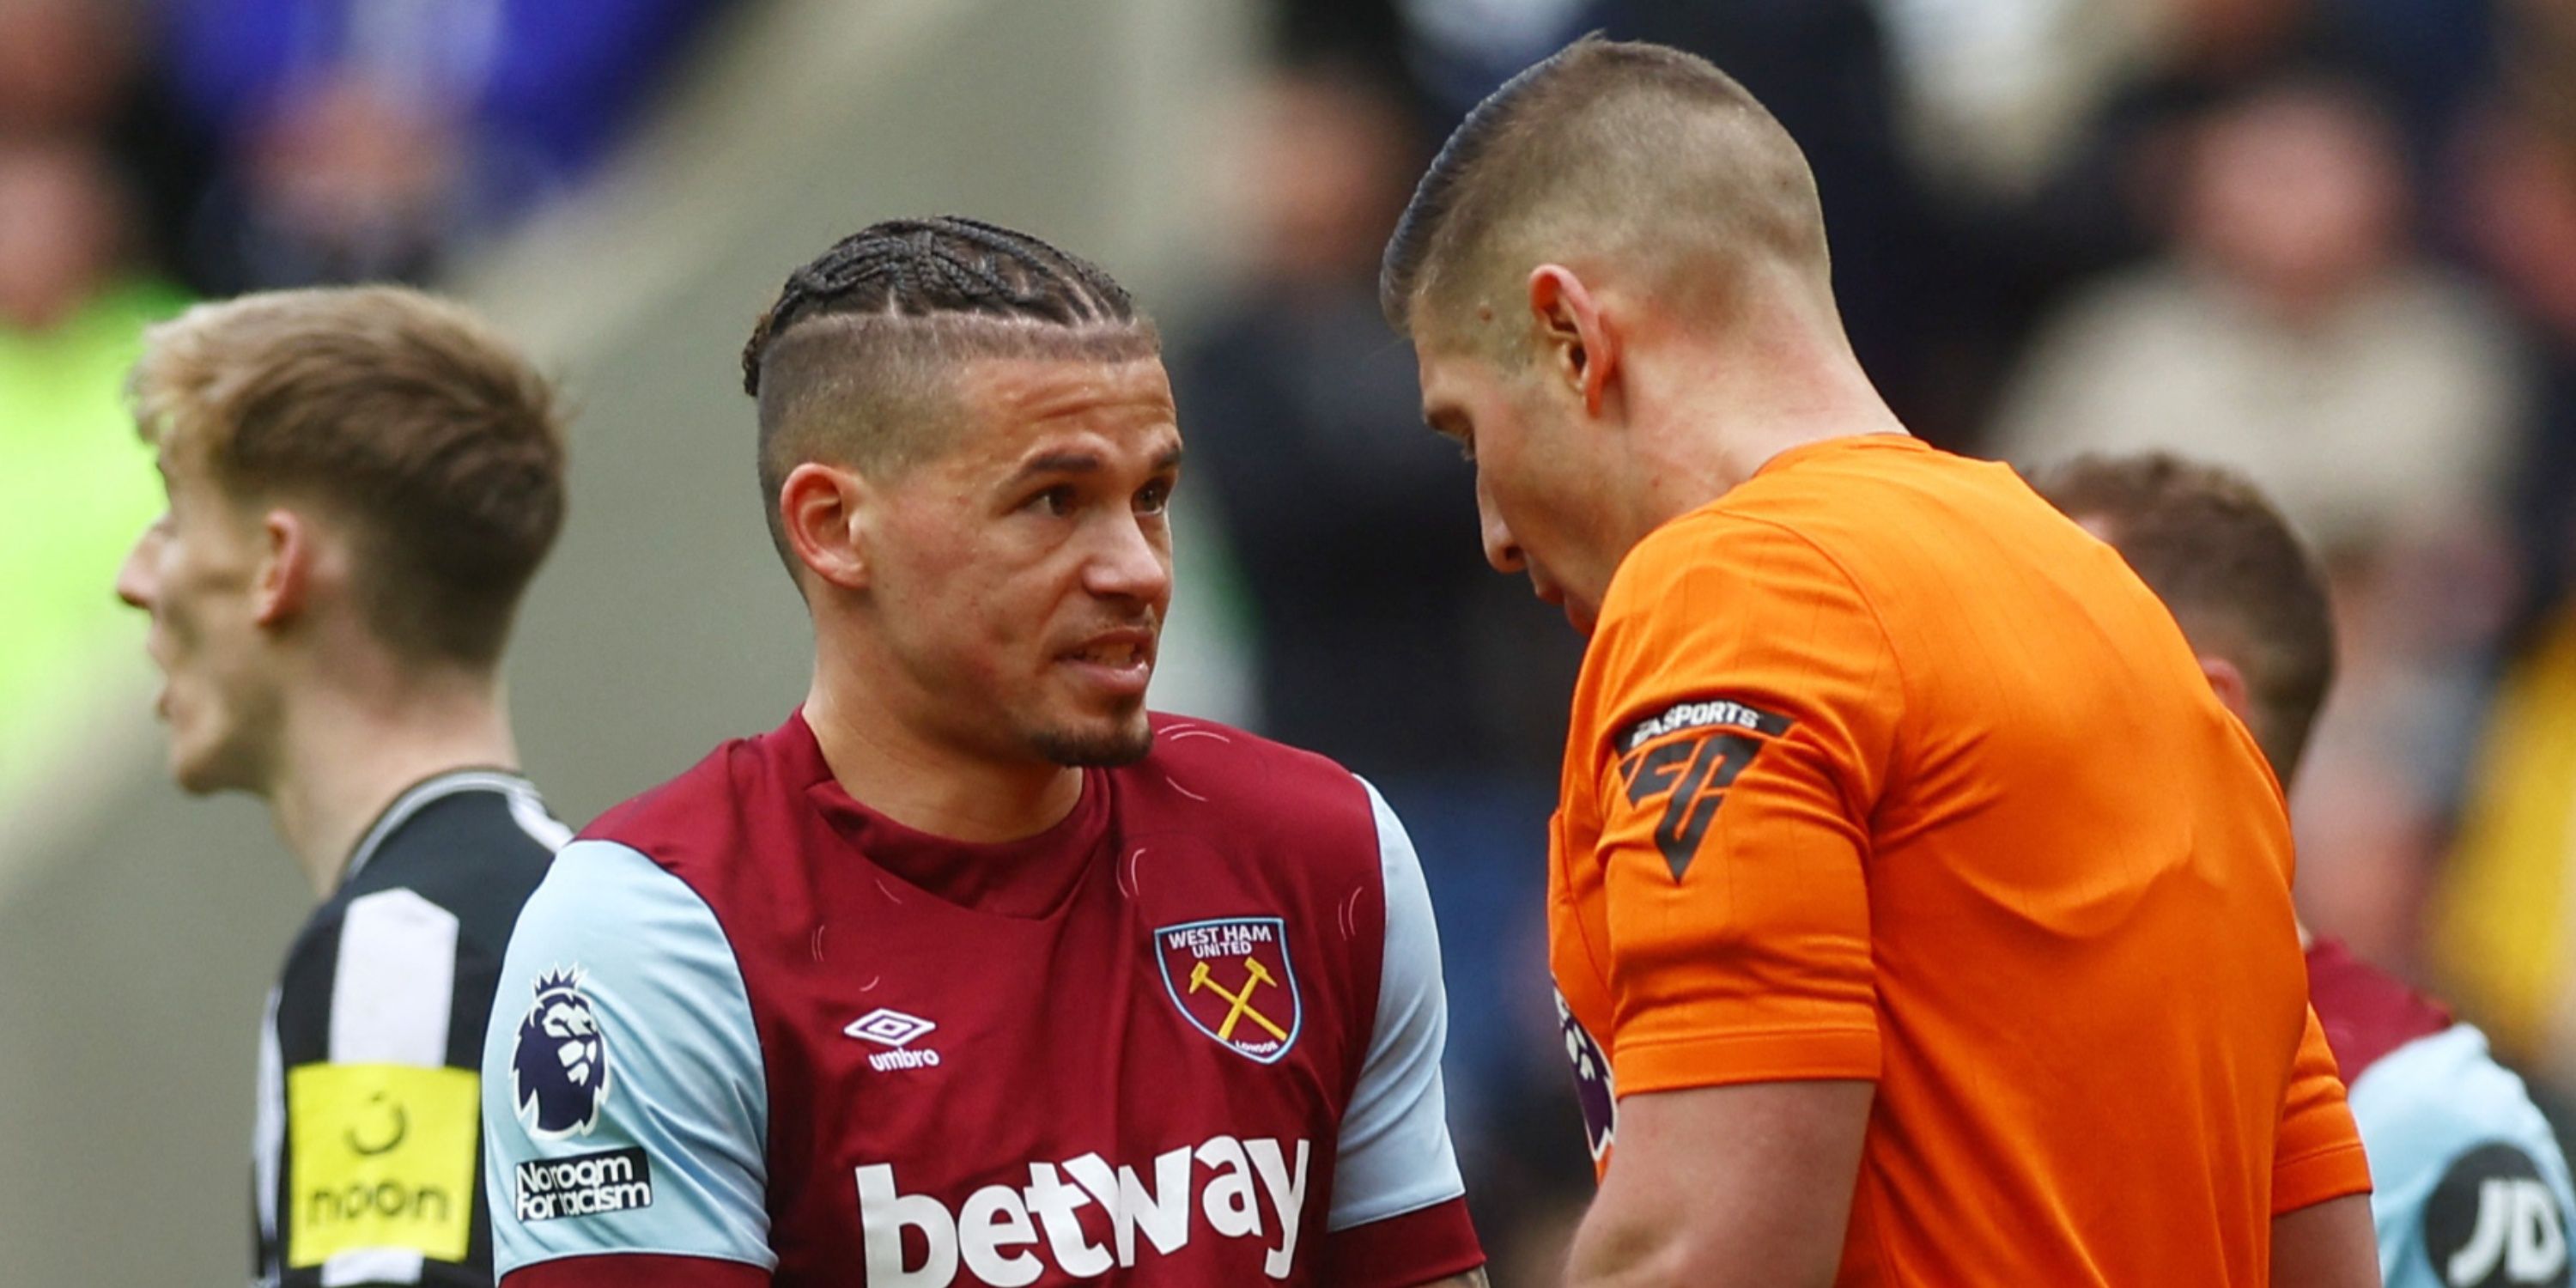 West Ham United's Kalvin Phillips remonstrates to referee Robert Jones after giving away a penalty